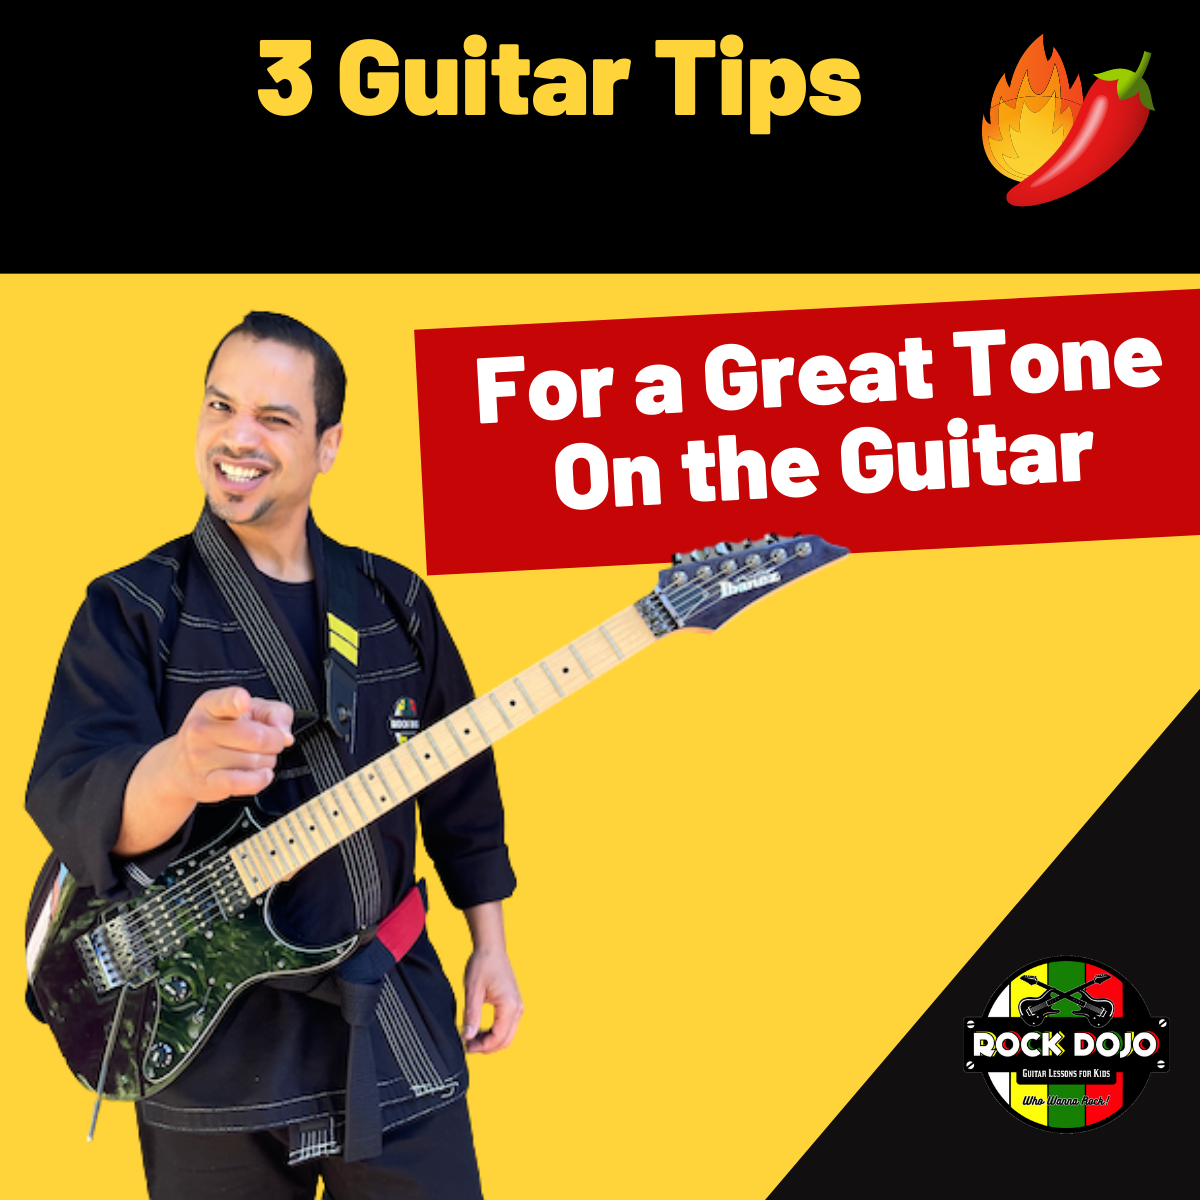 Learn how to get a great guitar tone.